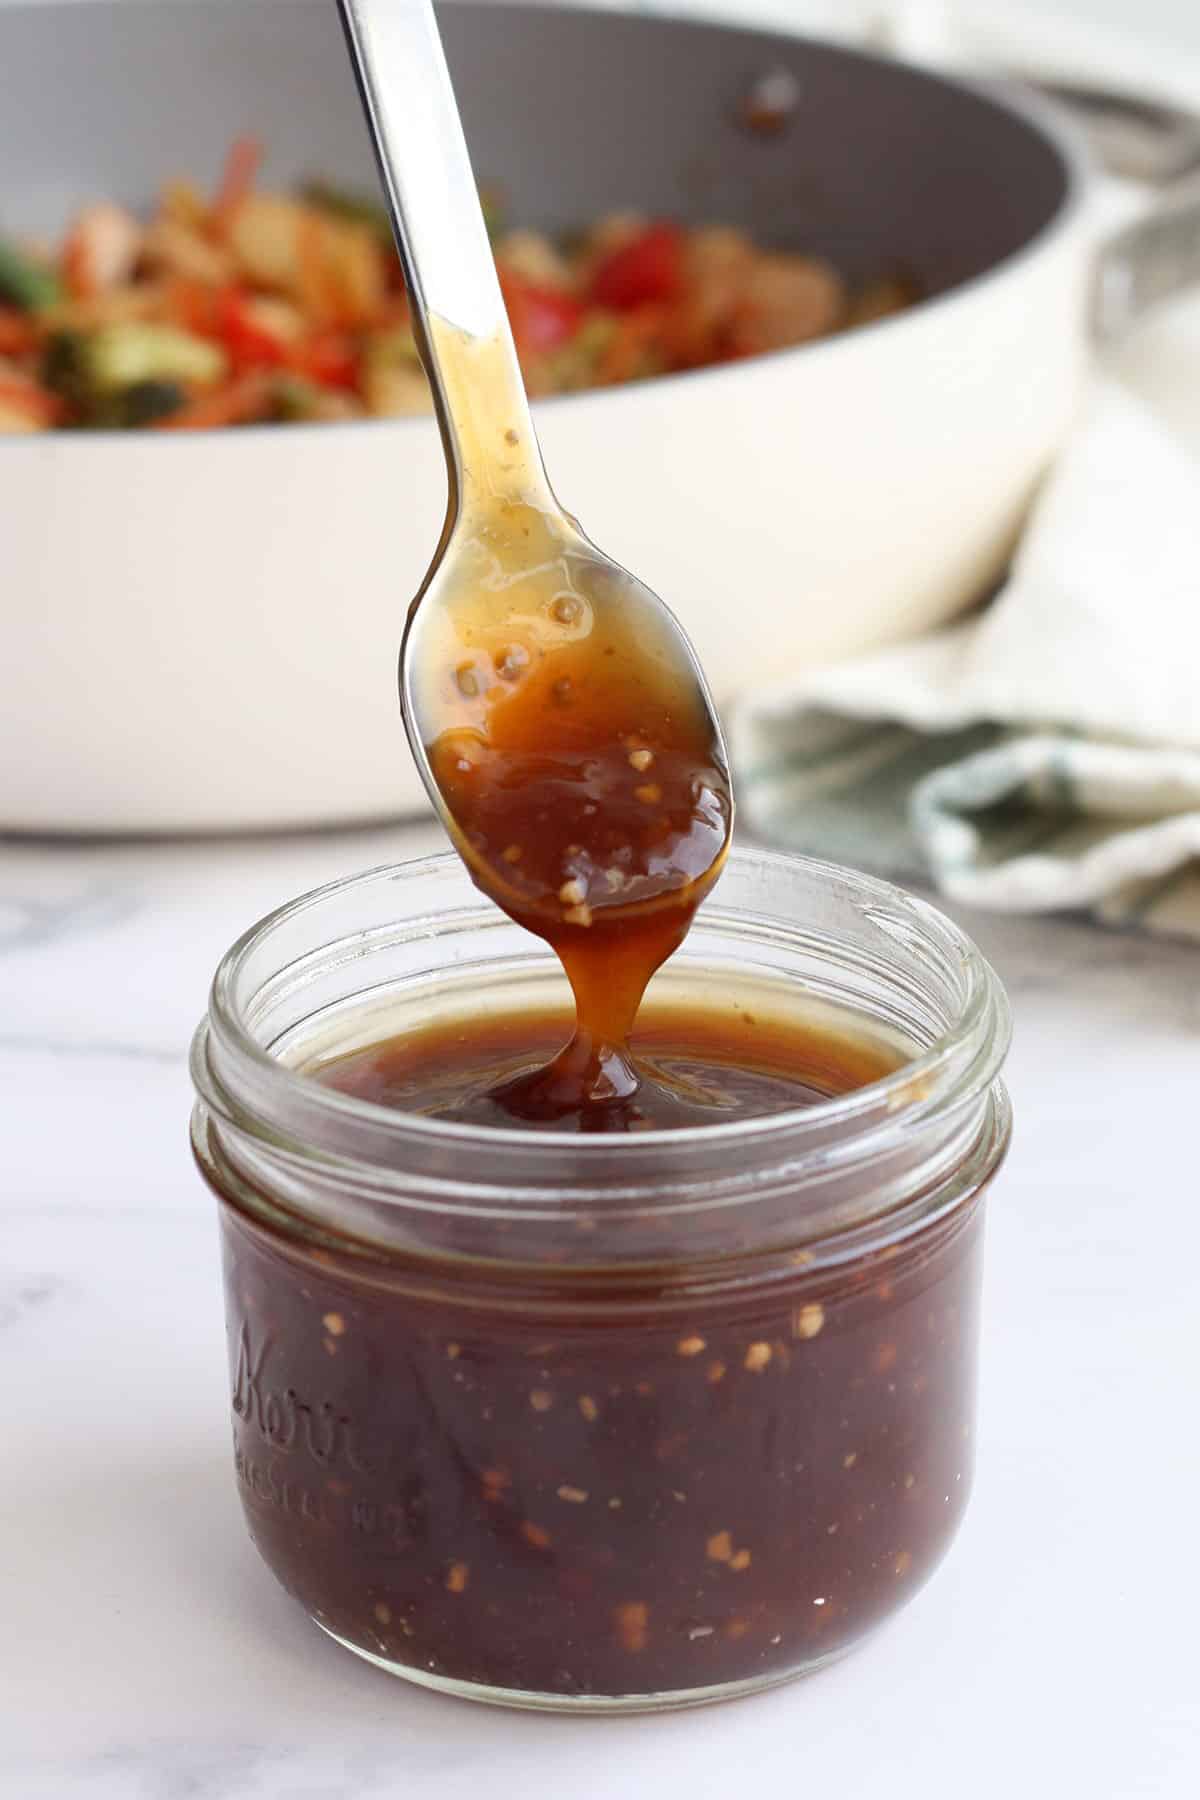 Homemade stir-fried sauce in a glass jar with a spoon